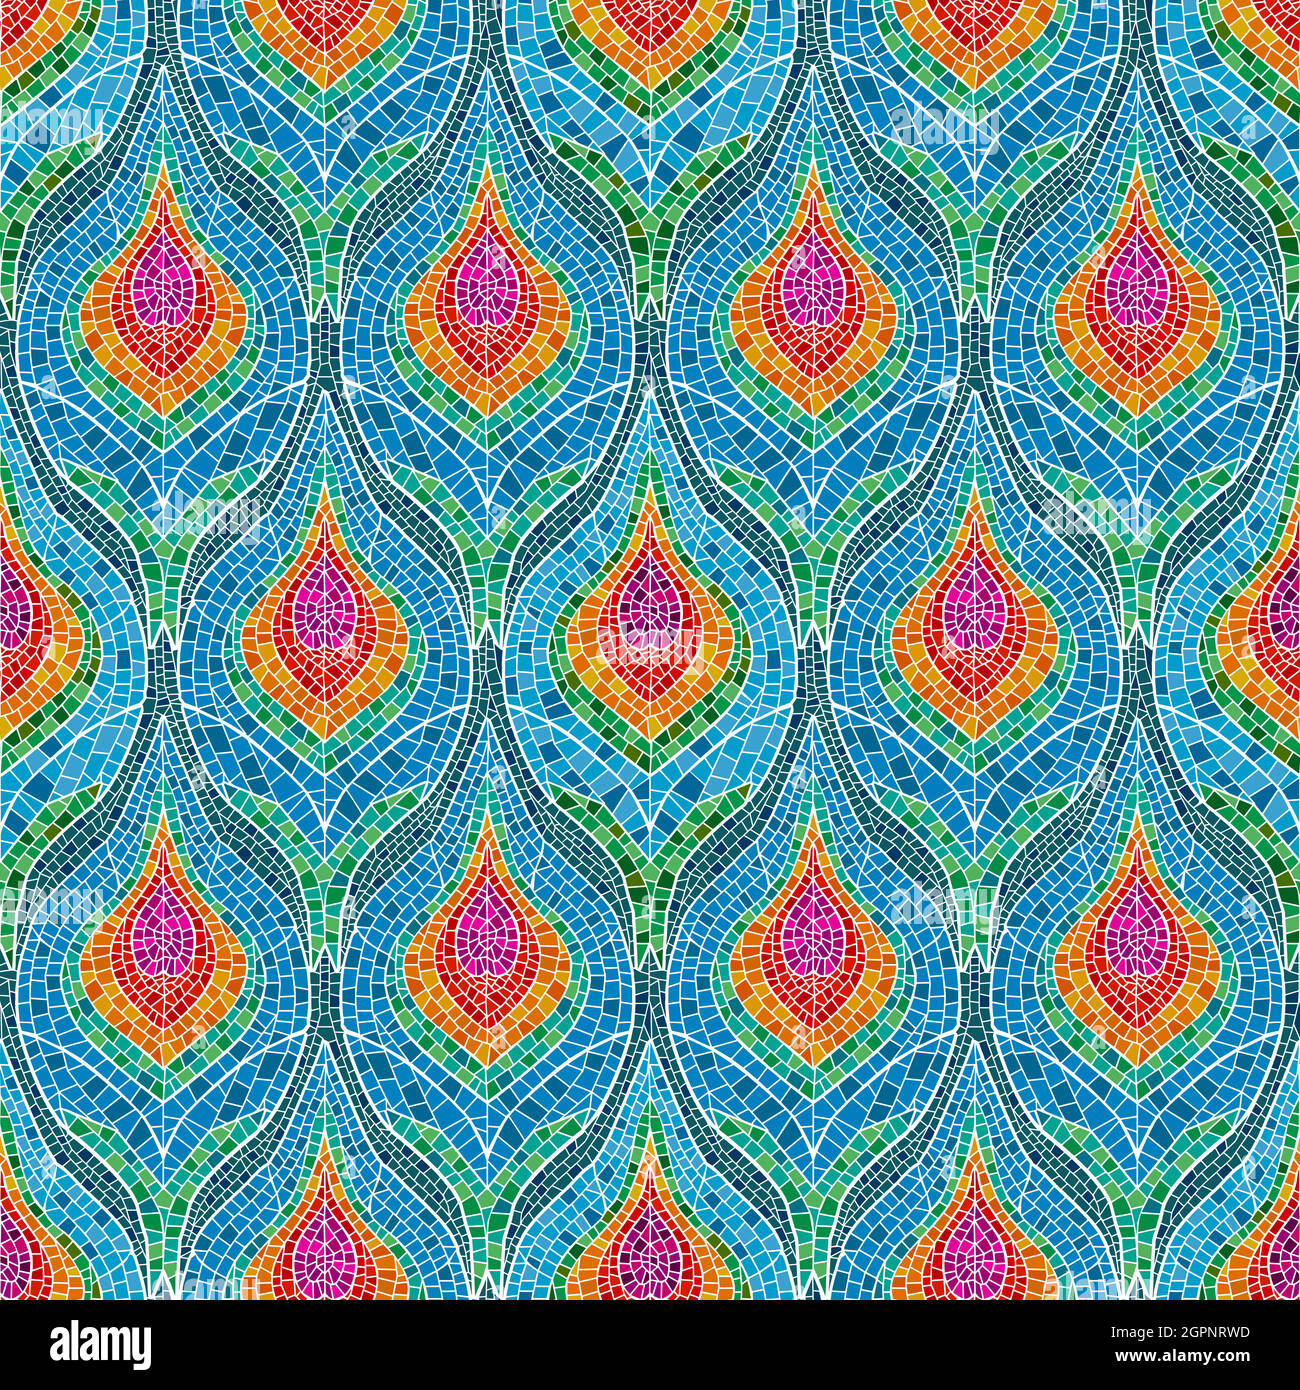 Mosaic feather pattern Stock Vector